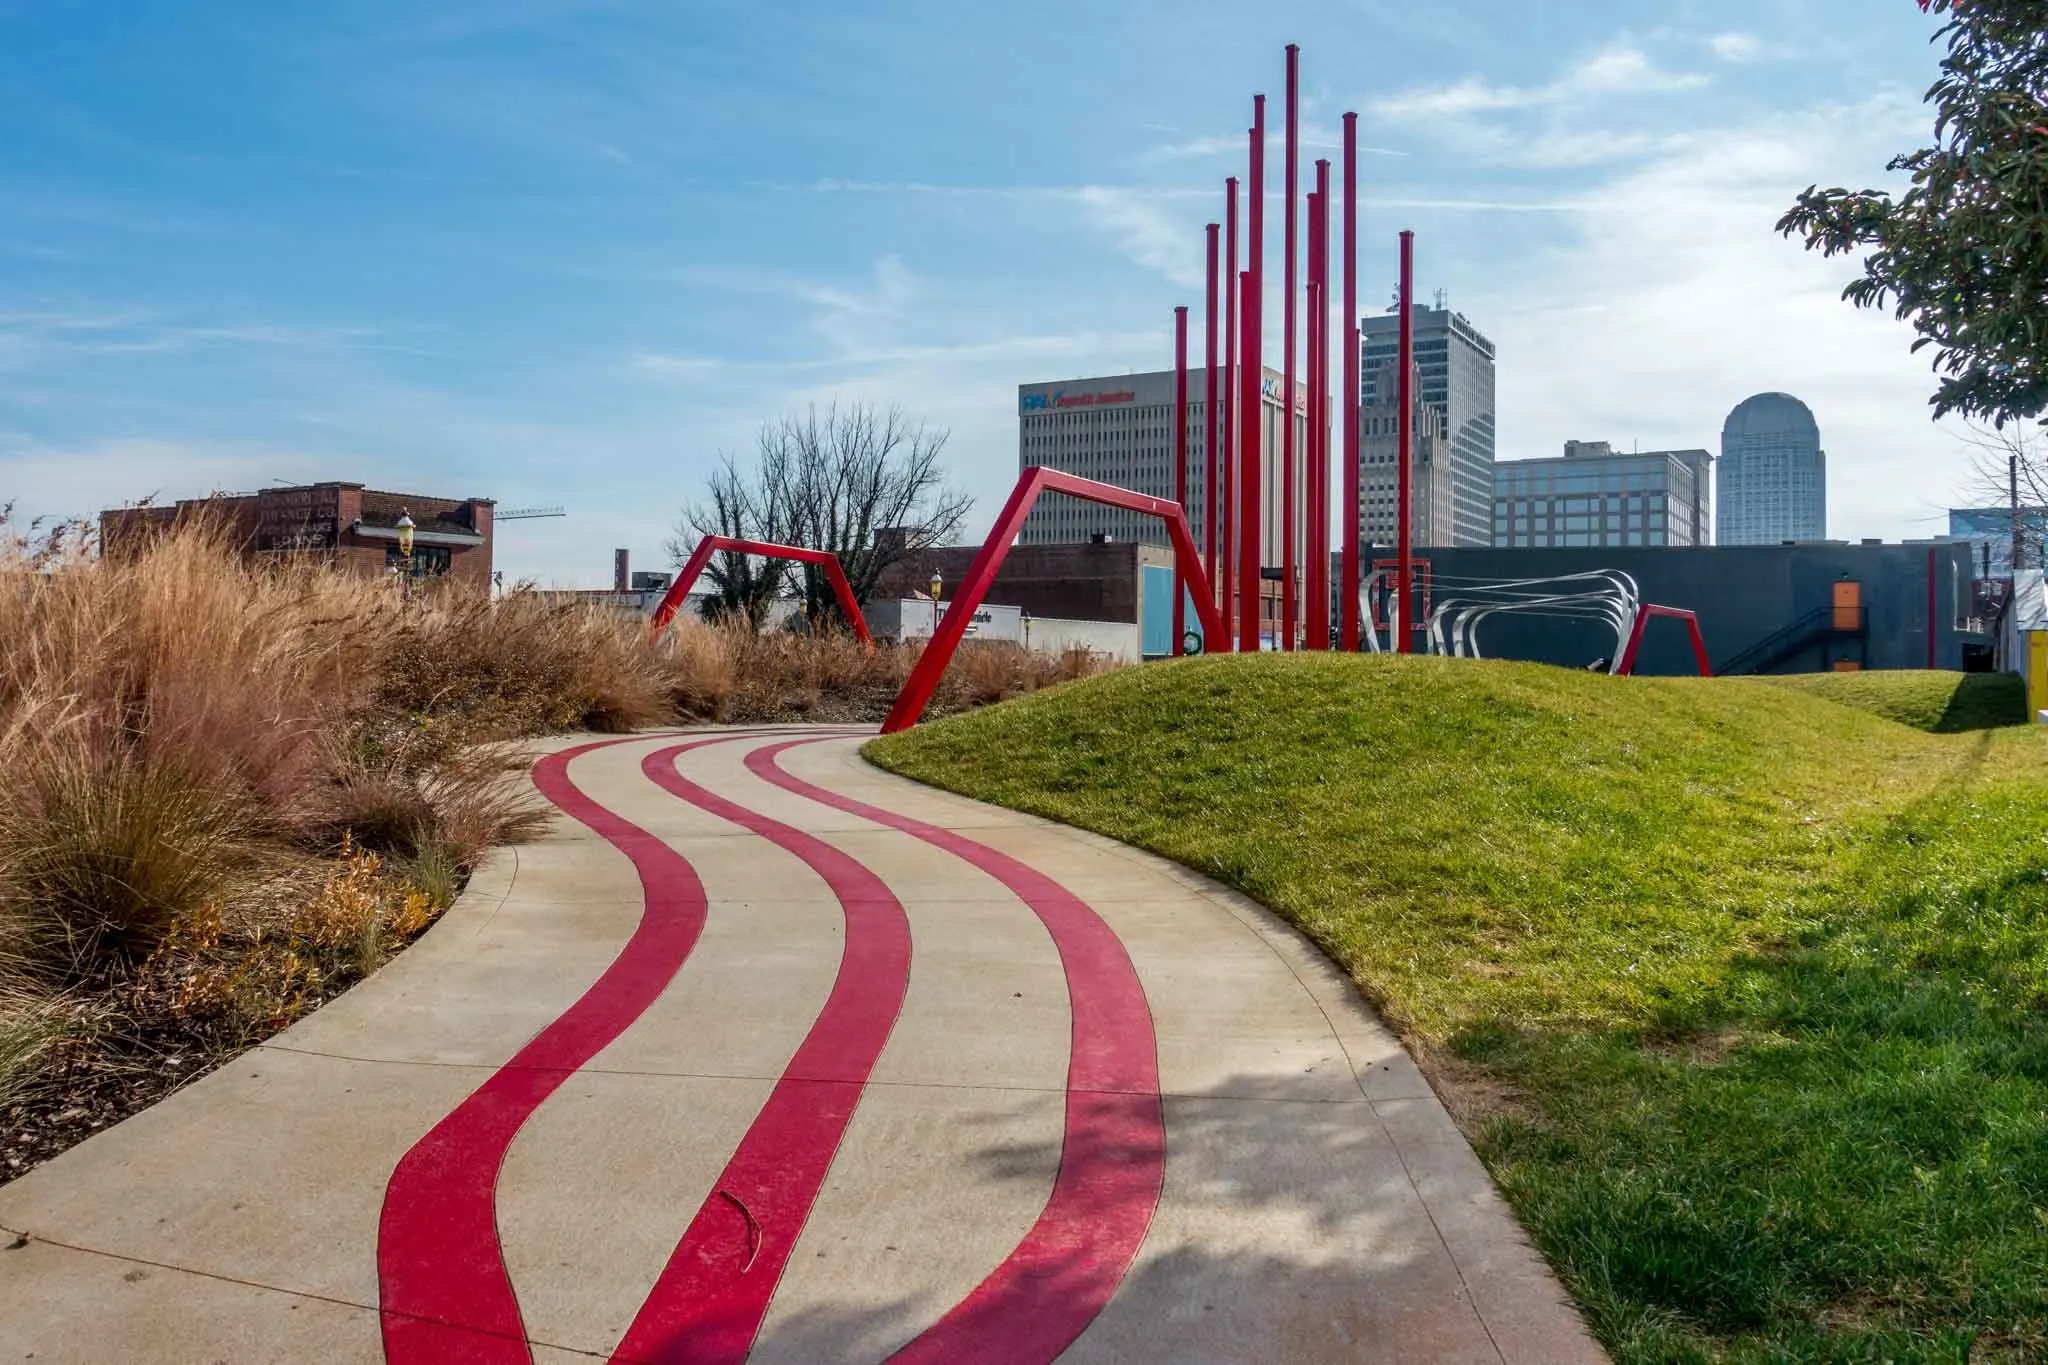 Outdoor artworks including a red sidewalk trail leading to a red sculpture.